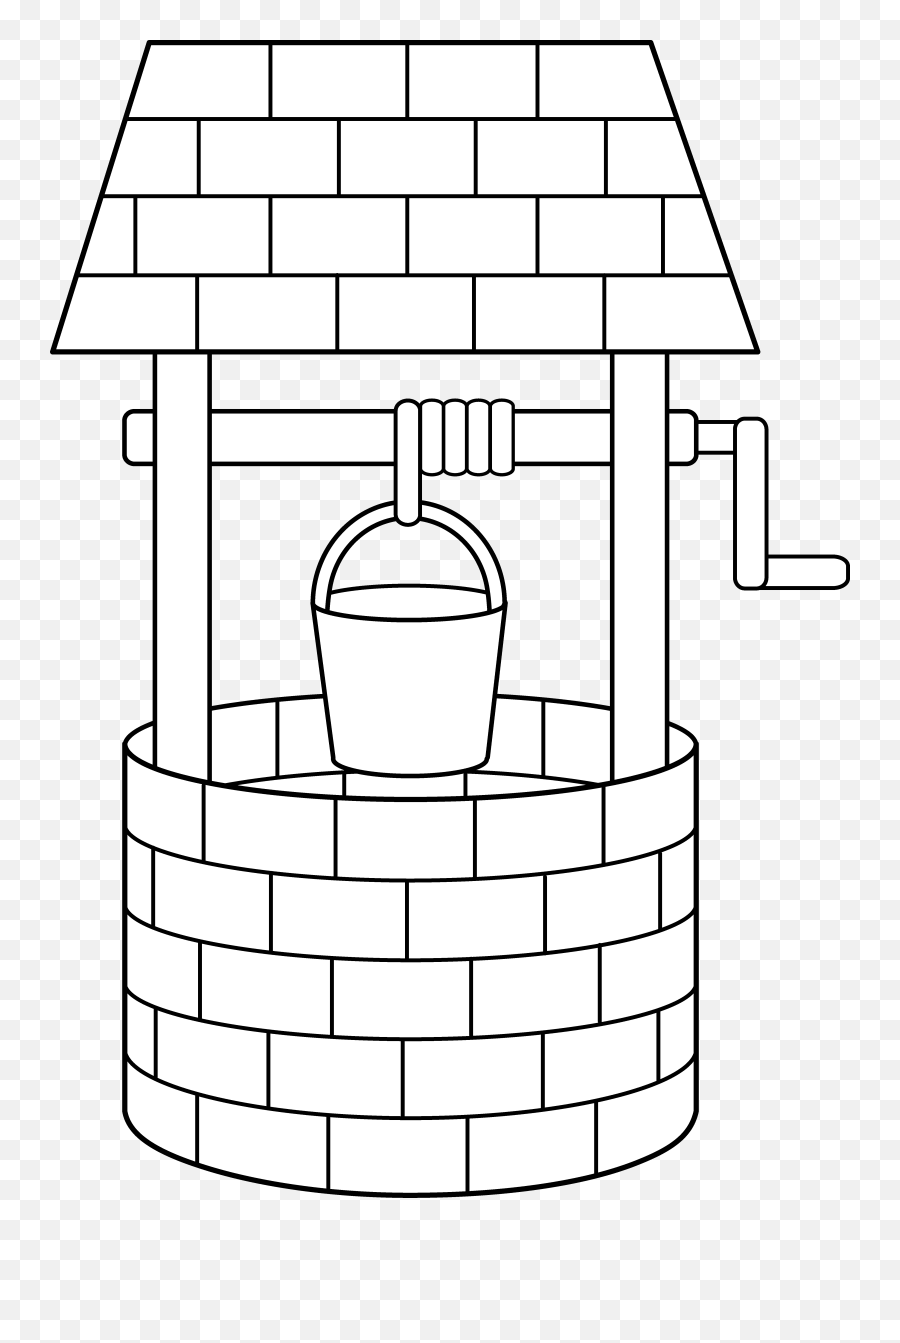 Well Cliparts Download Free Clip Art - Colouring Picture Of Well Emoji,Well Clipart